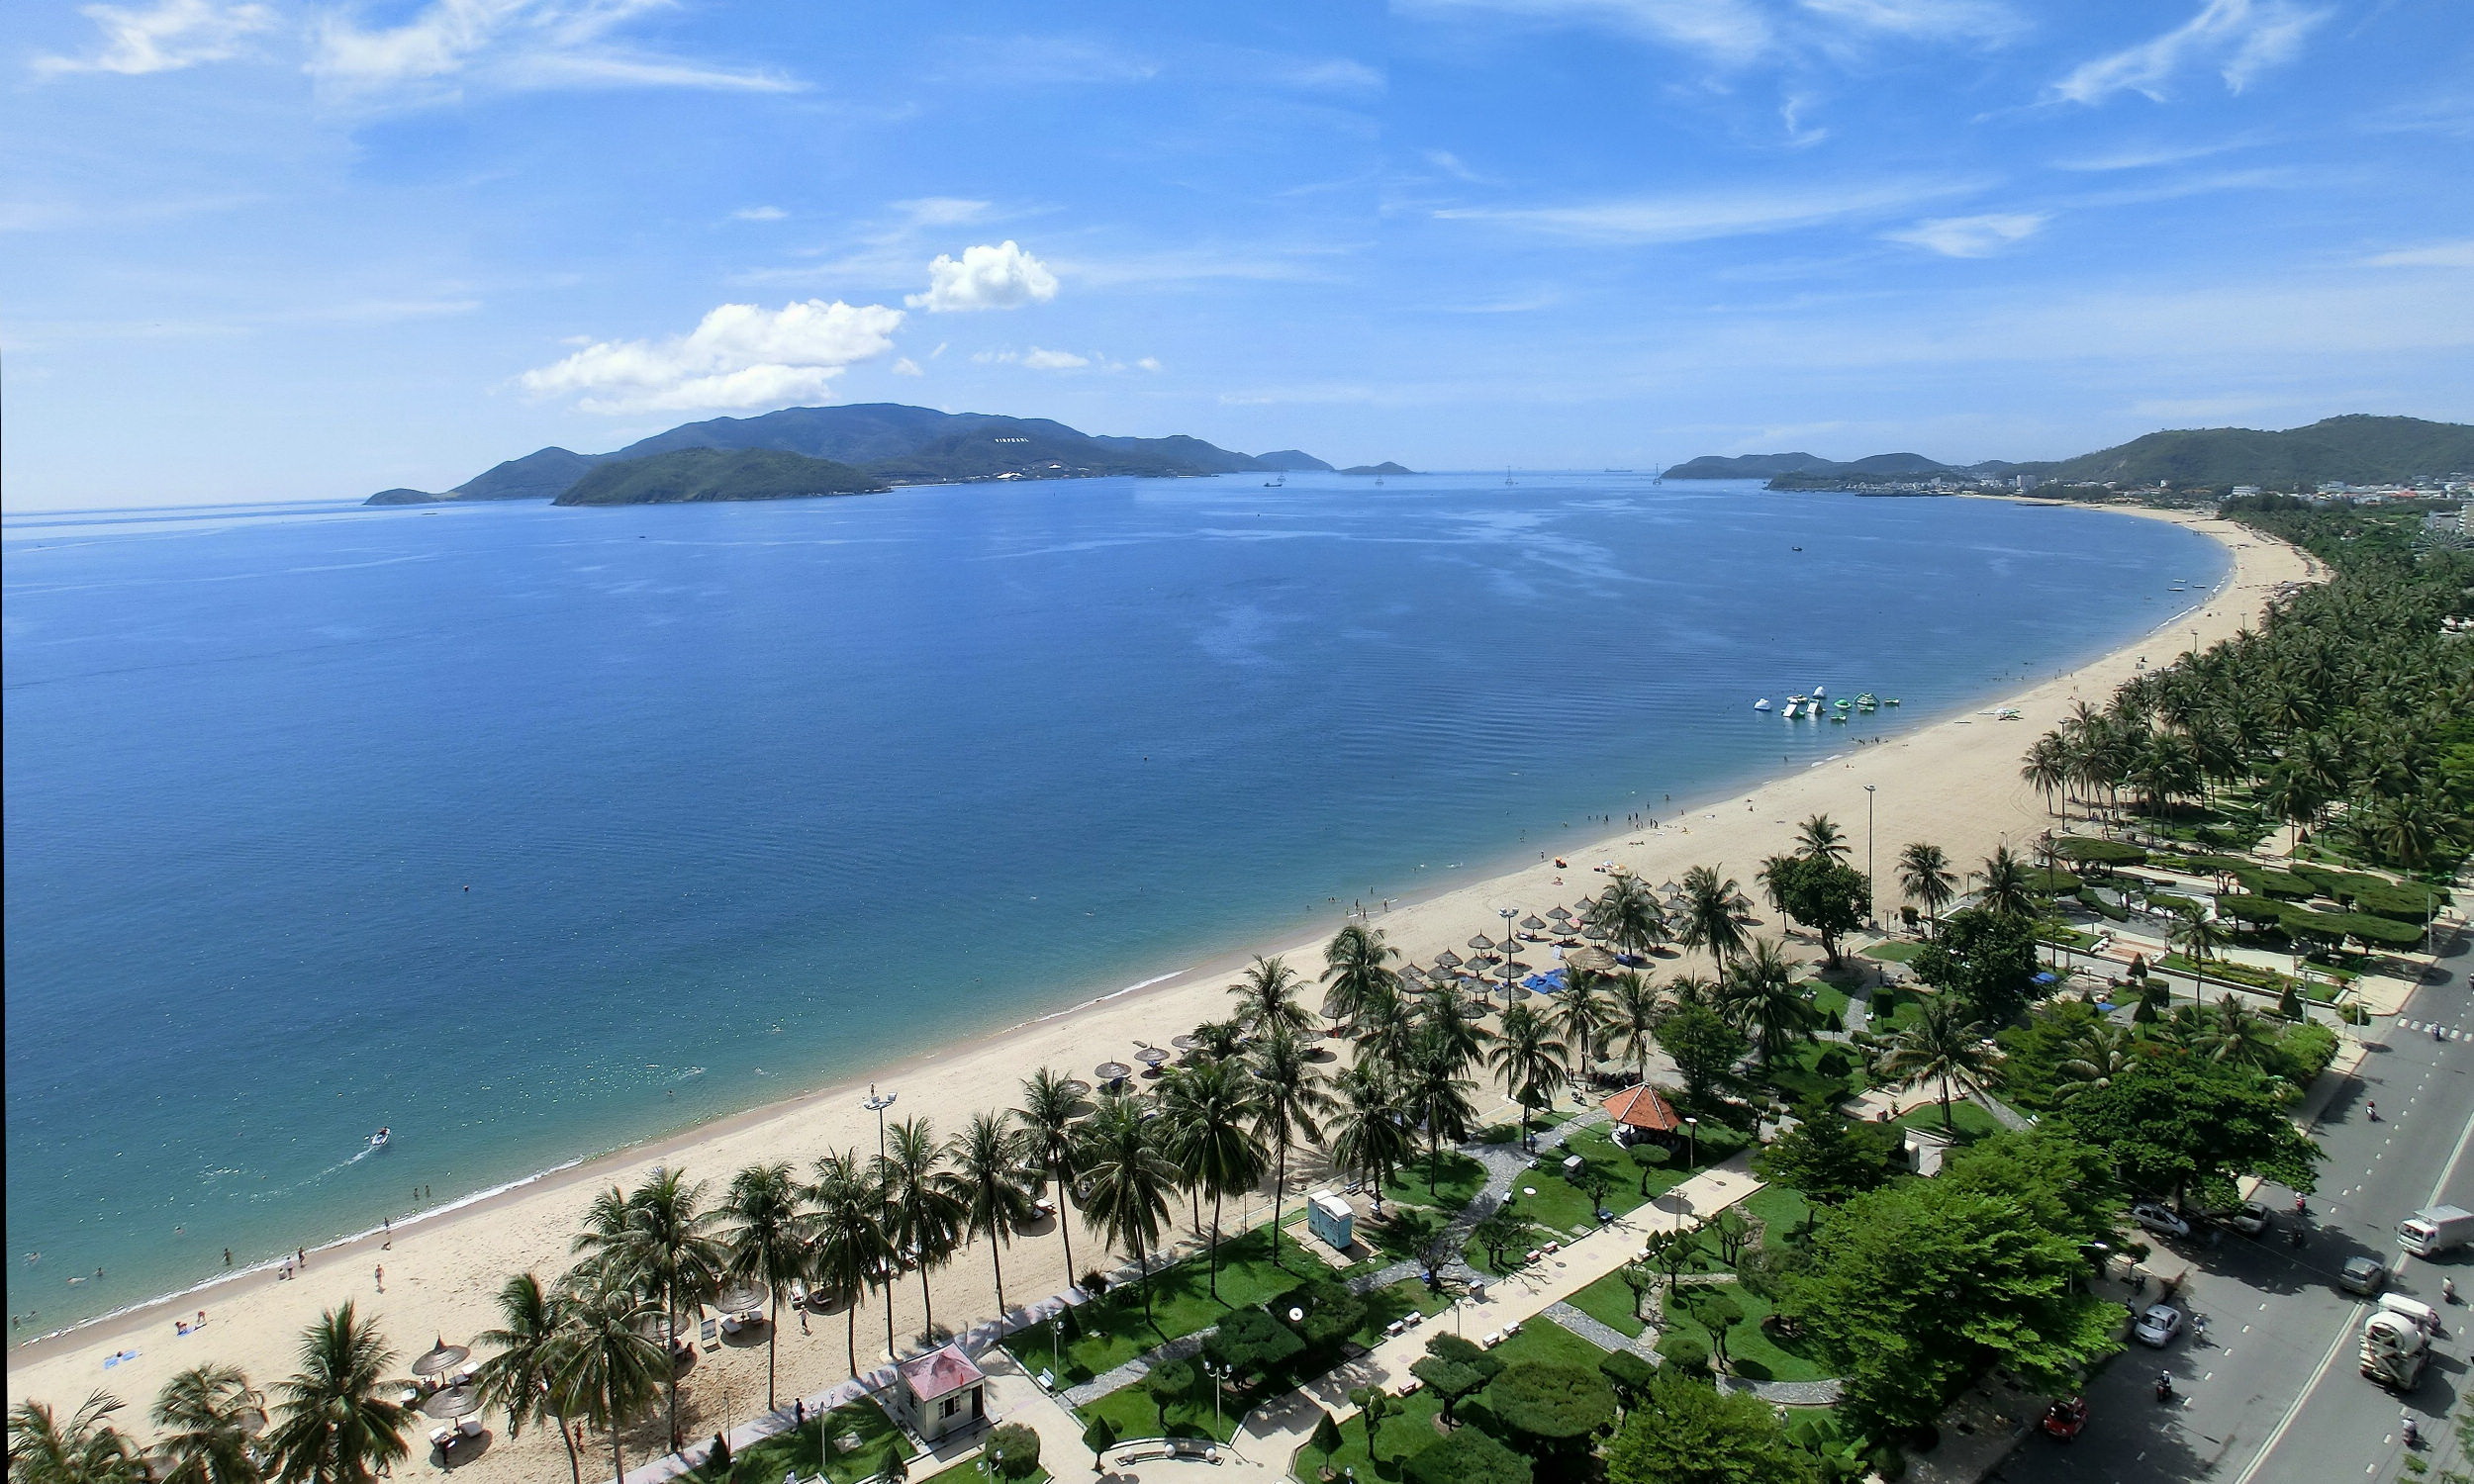 Waves of Chinese tourists fill Nha Trang during Tet